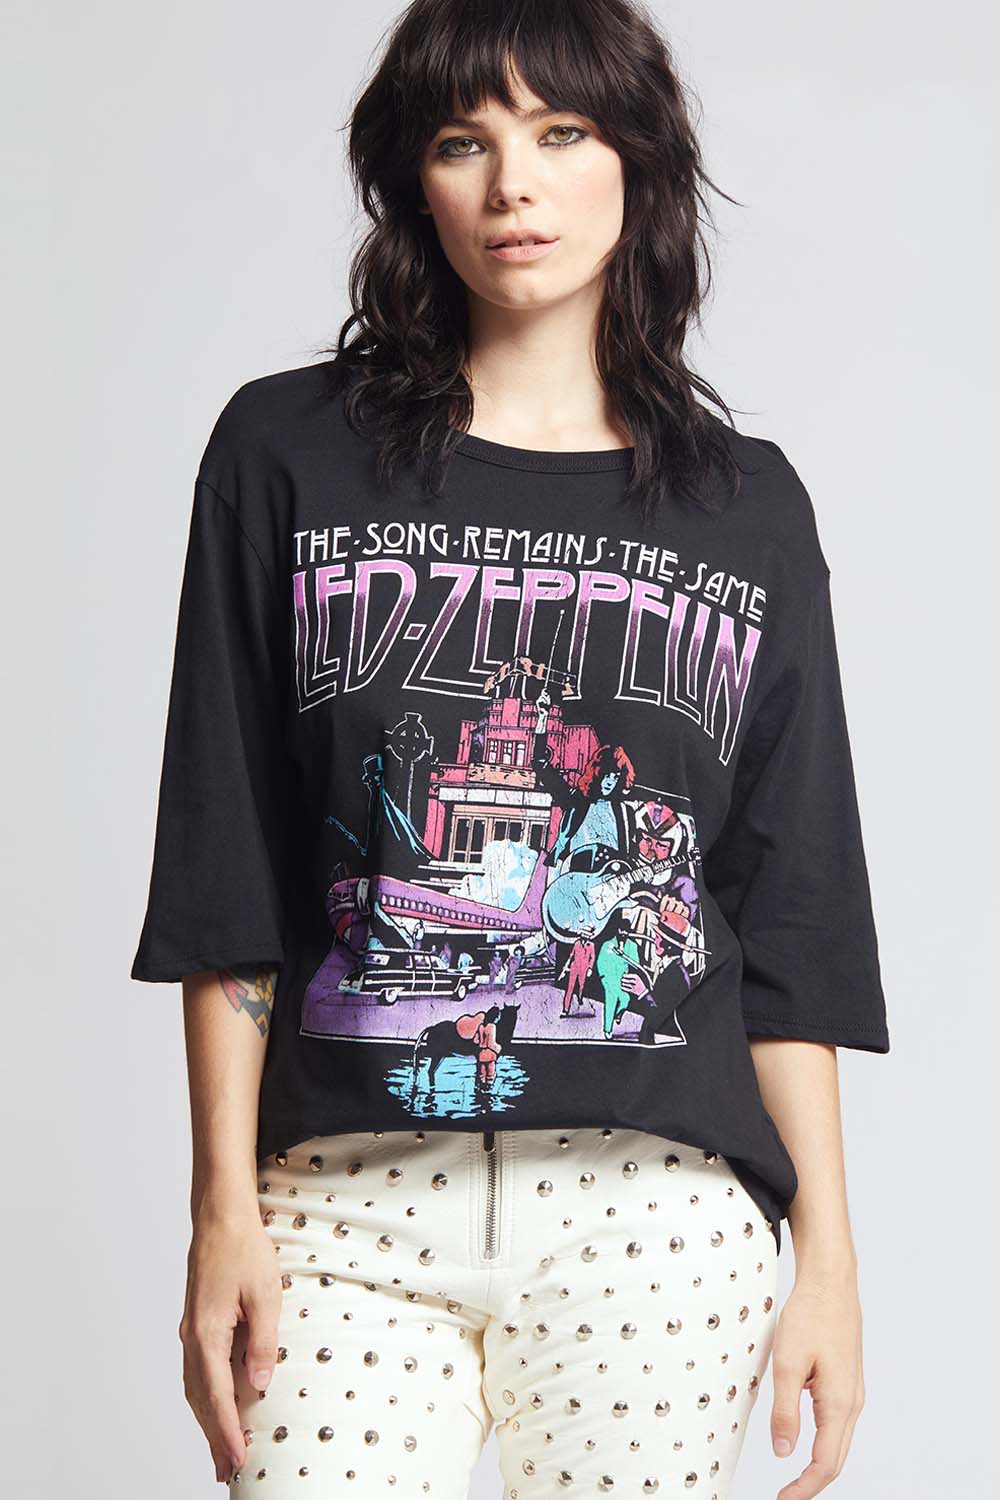 Led Zeppelin The Song The Same Tee - Recycled Brands